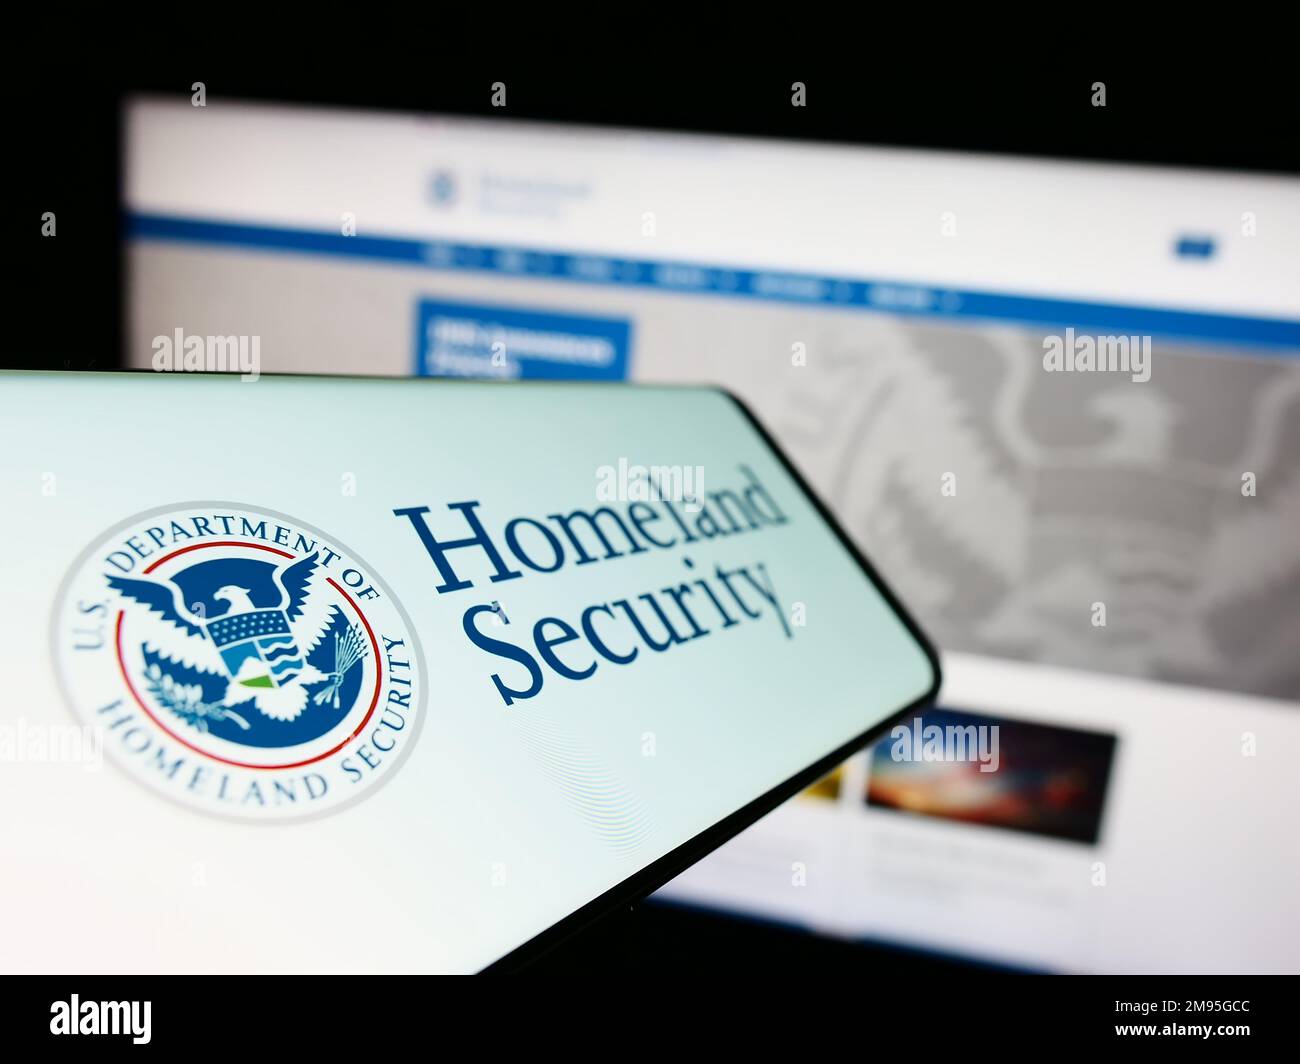 Mobile phone with seal of American Department of Homeland Security (DHS) on screen in front of website. Focus on center-left of phone display. Stock Photo